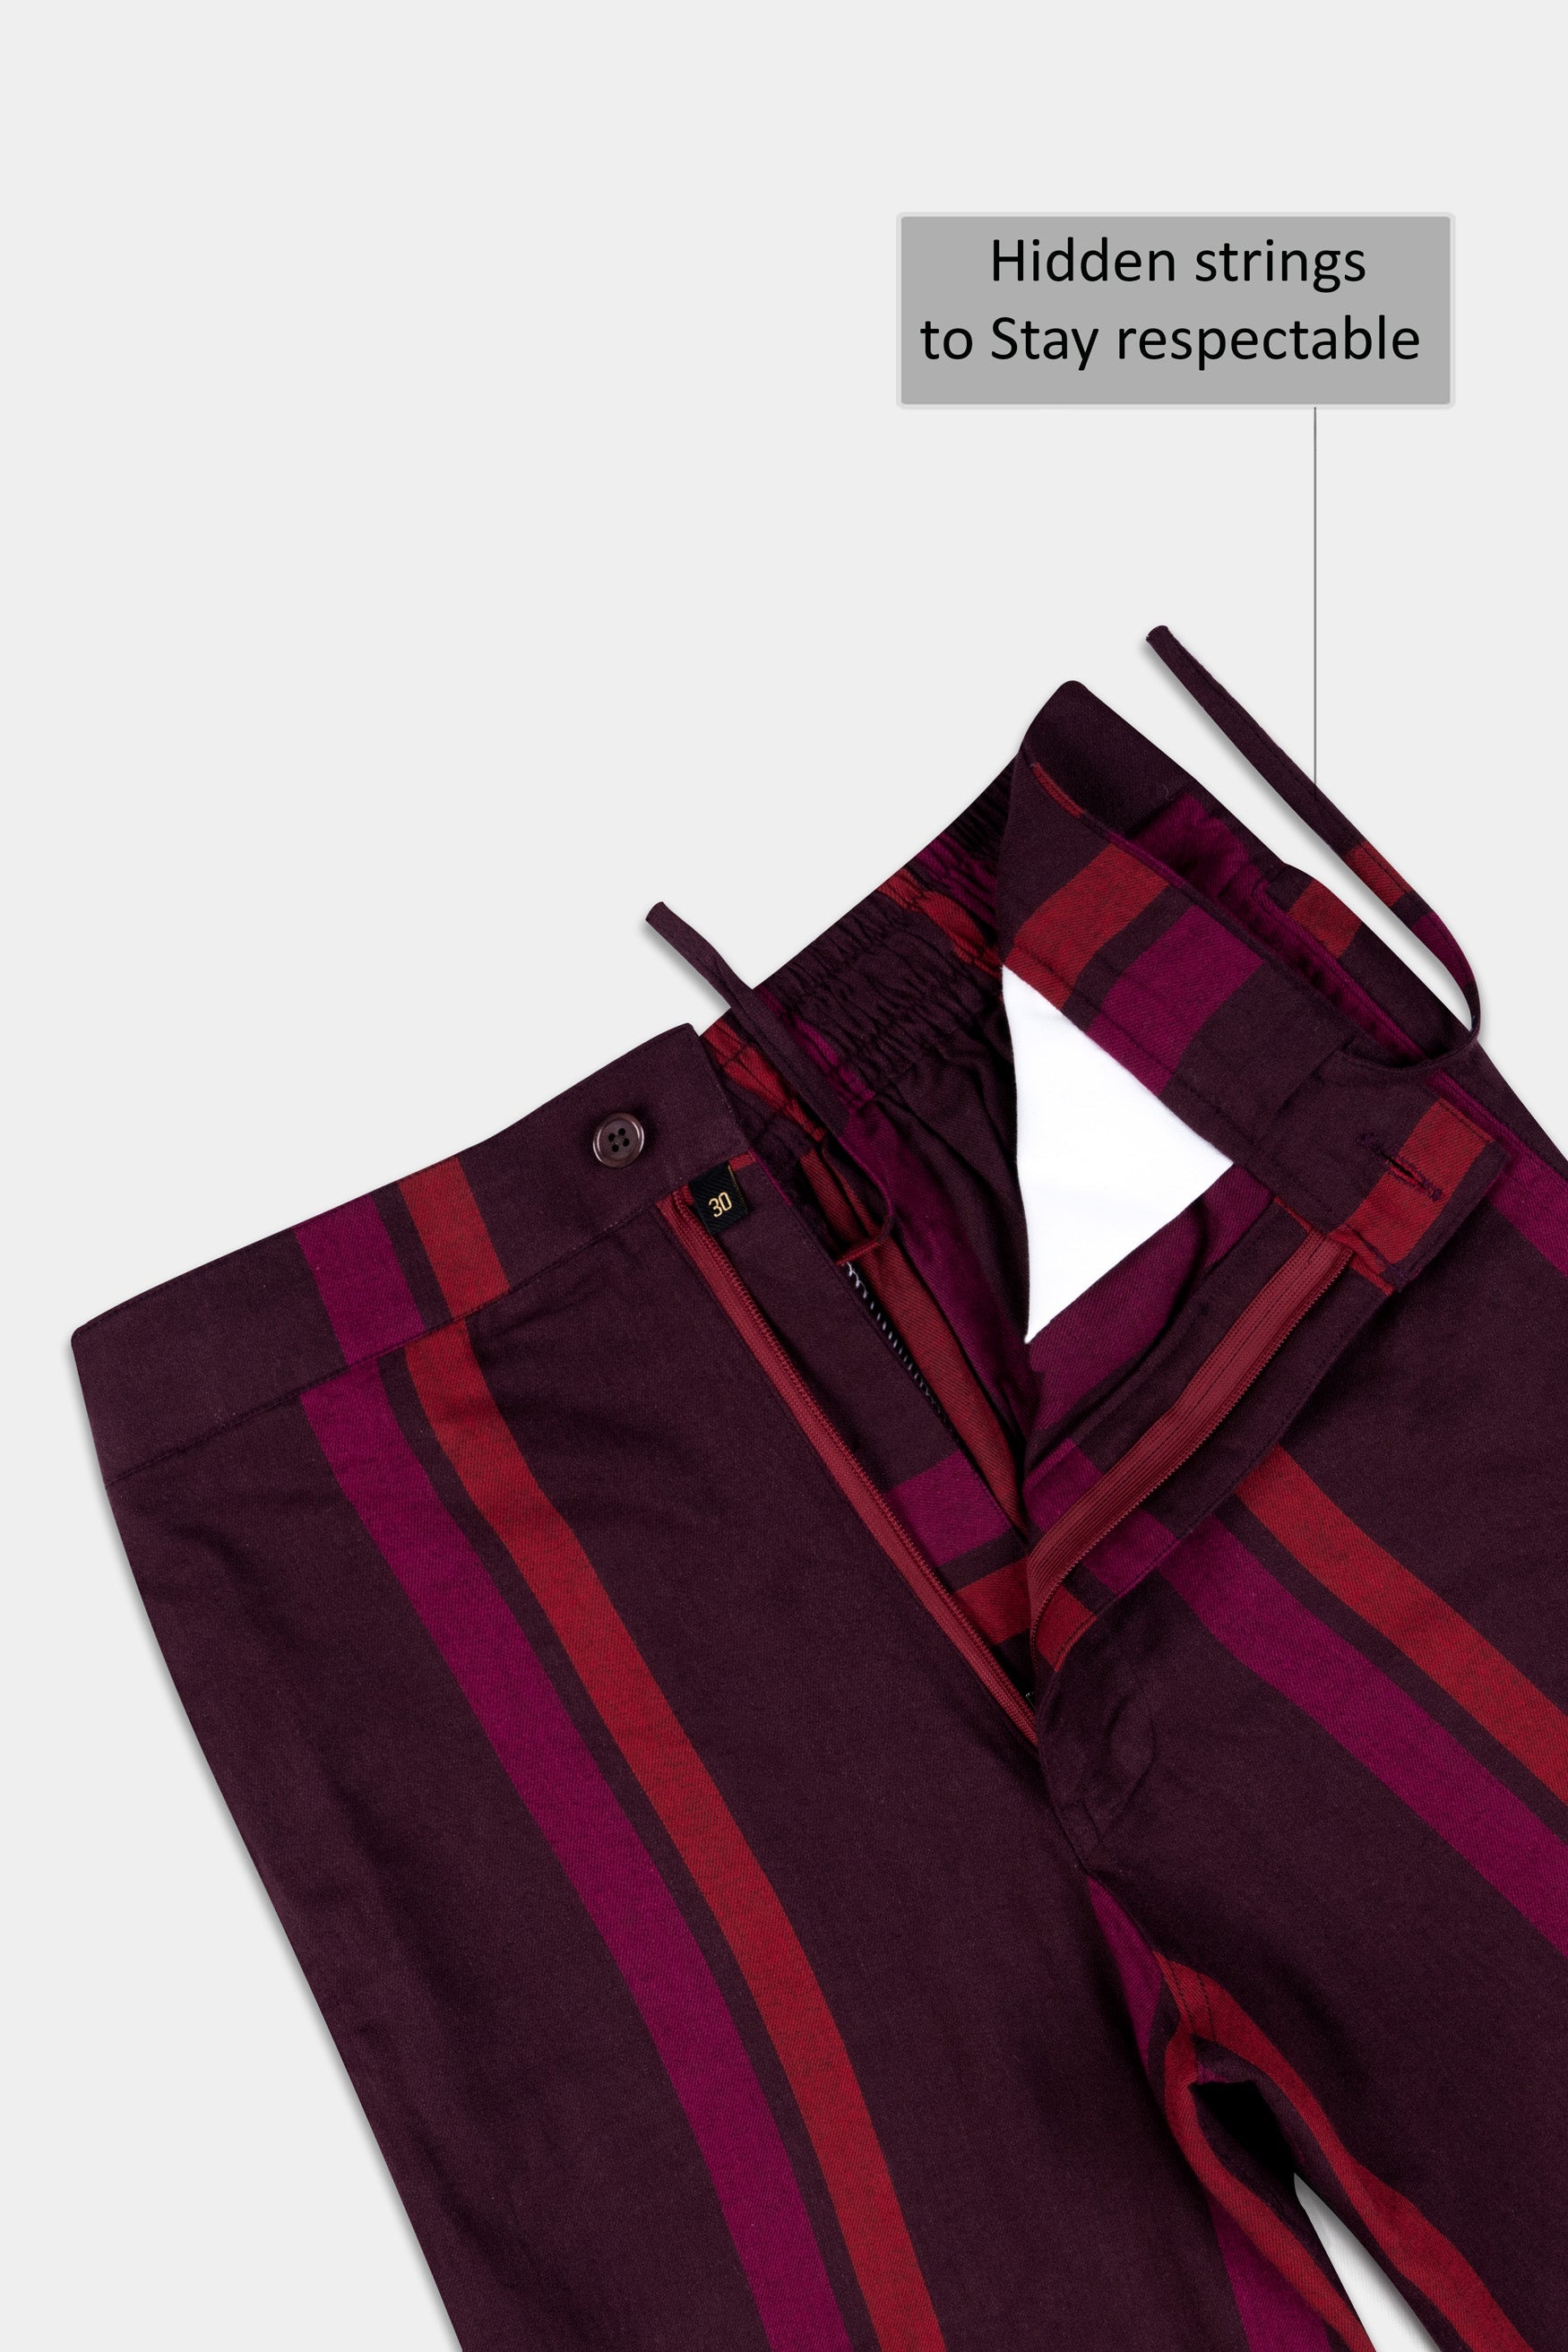 Aubergine Maroon and Paprika Red Striped Twill Premium Cotton Shorts SR398-28, SR398-30, SR398-32, SR398-34, SR398-36, SR398-38, SR398-40, SR398-42, SR398-44